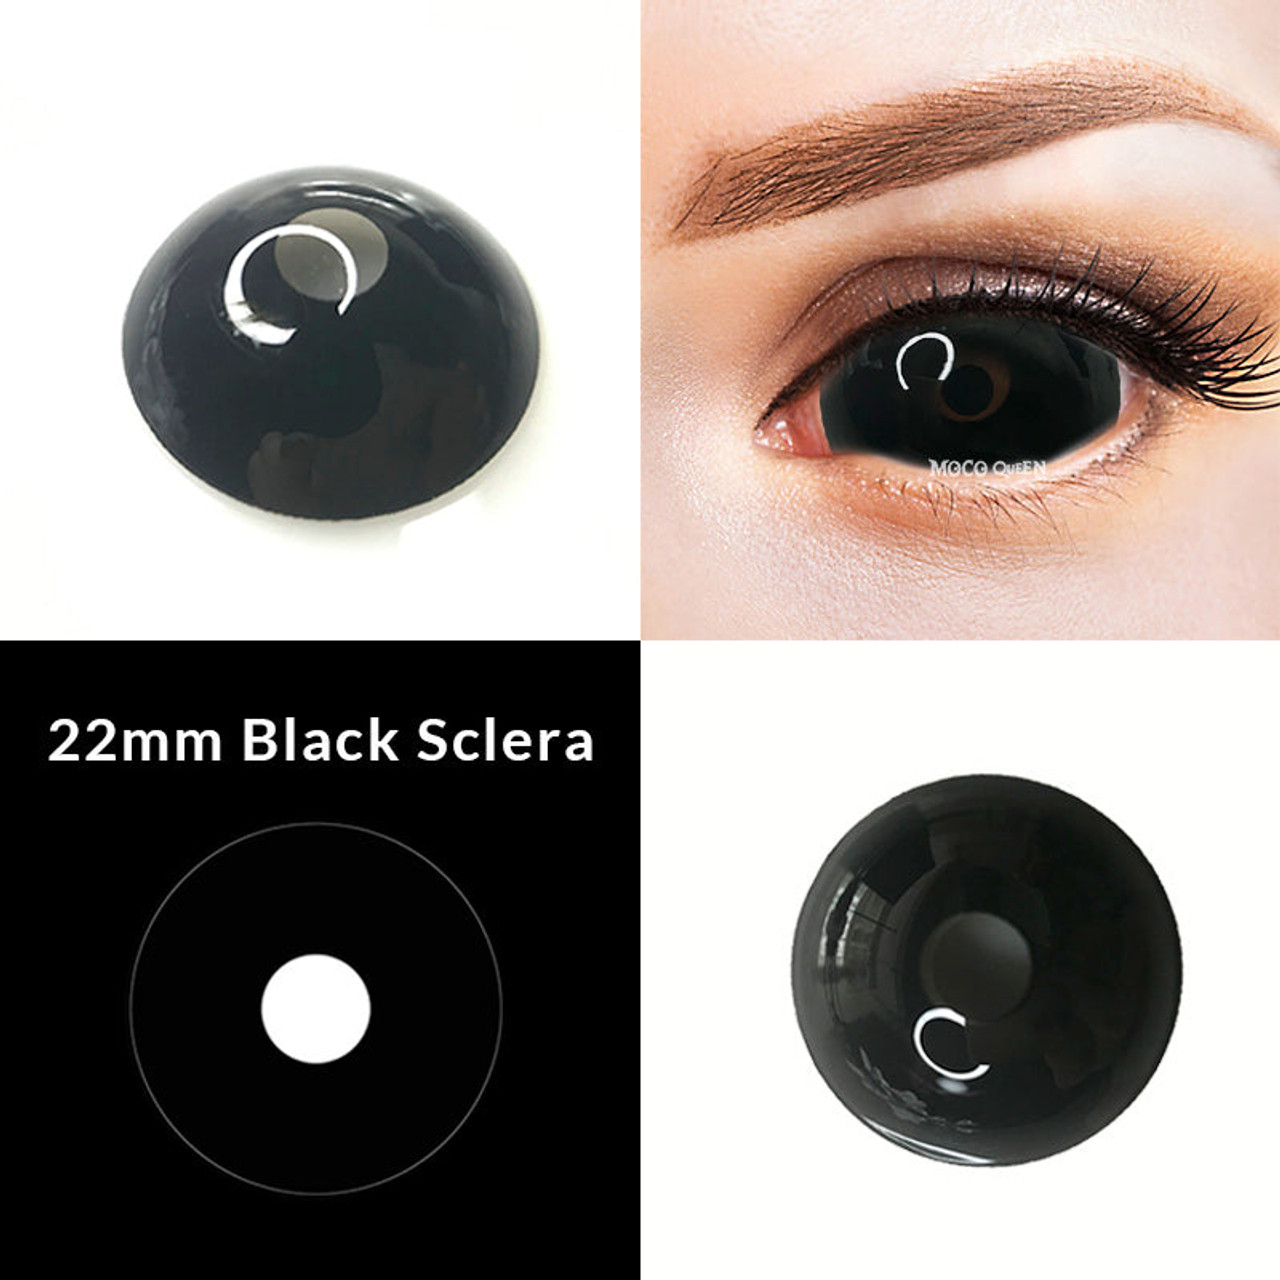 Real Black Colored Contacts Online And Black Colored Eye Contacts Lens Sale